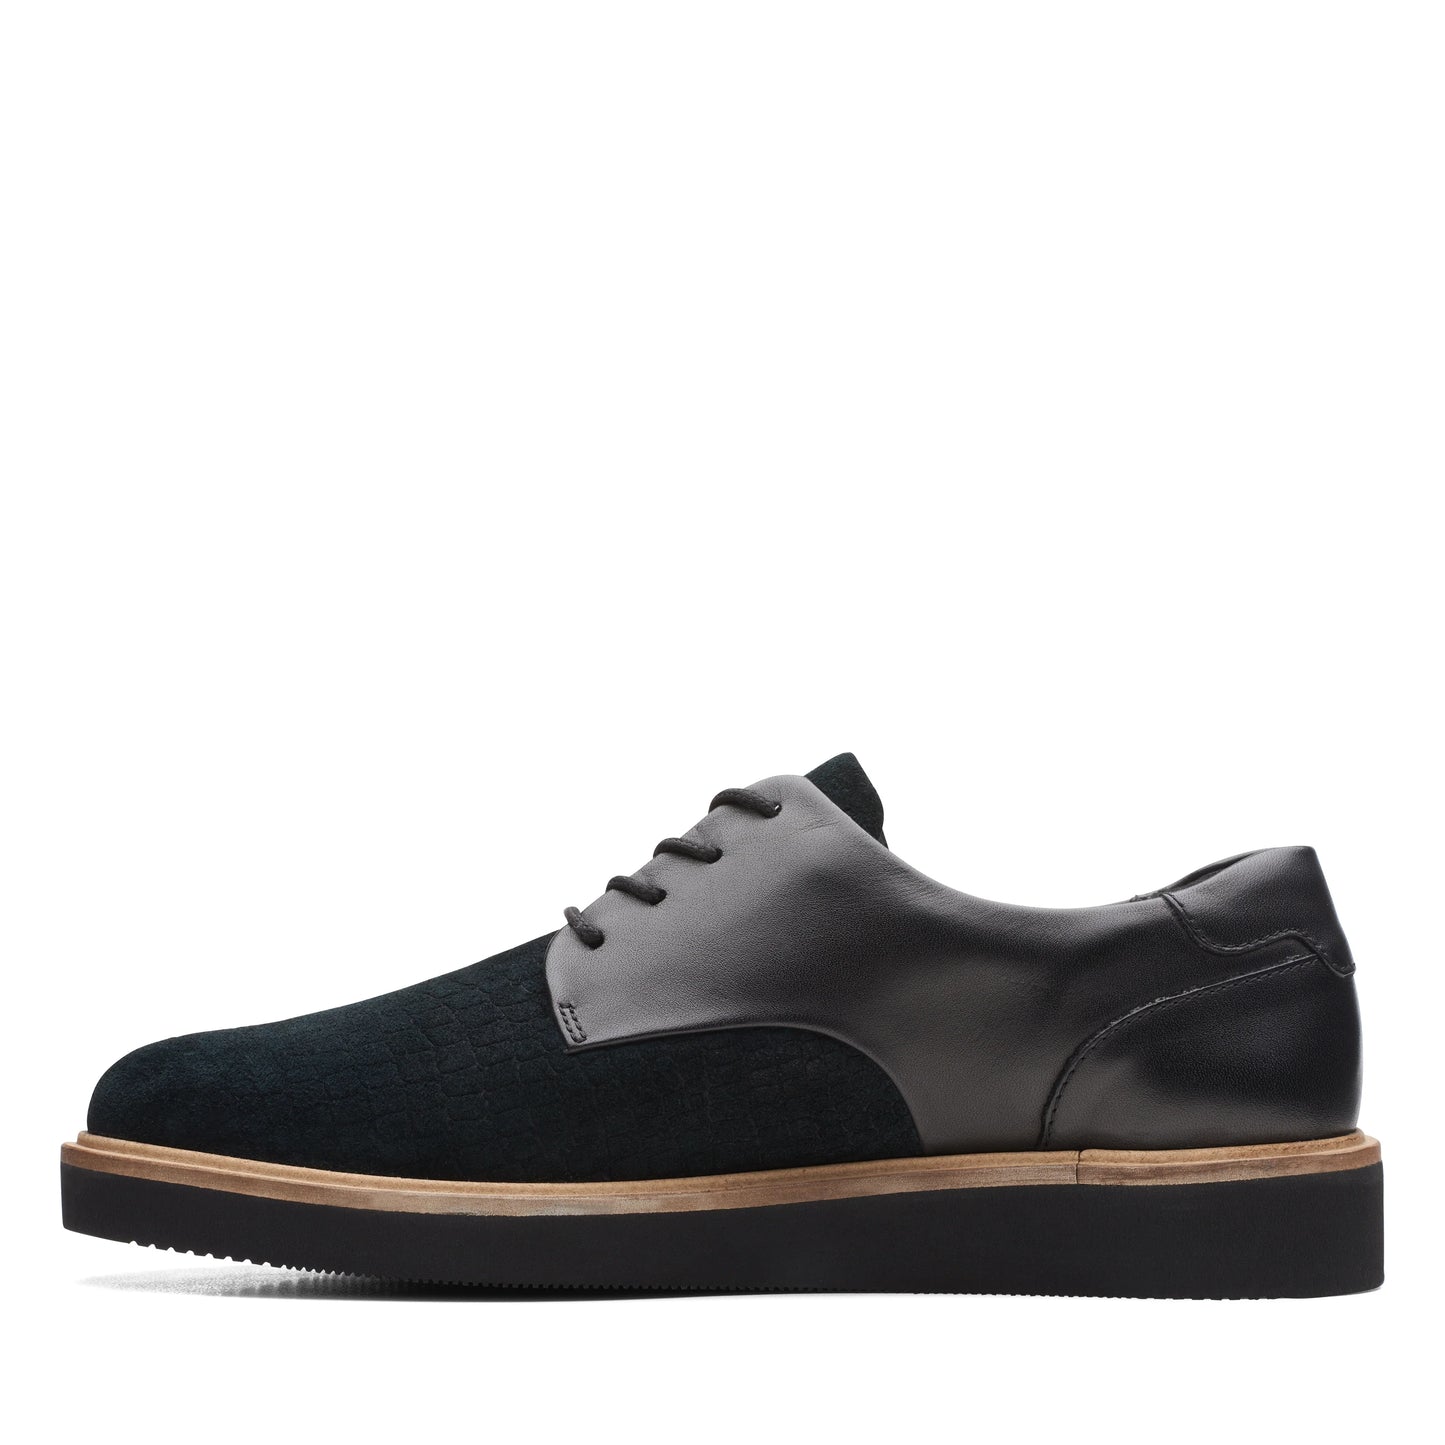 CLARKS | ZAPATOS DERBY MUJER | BAILLE LACE BLACK COMBI | NEGRO